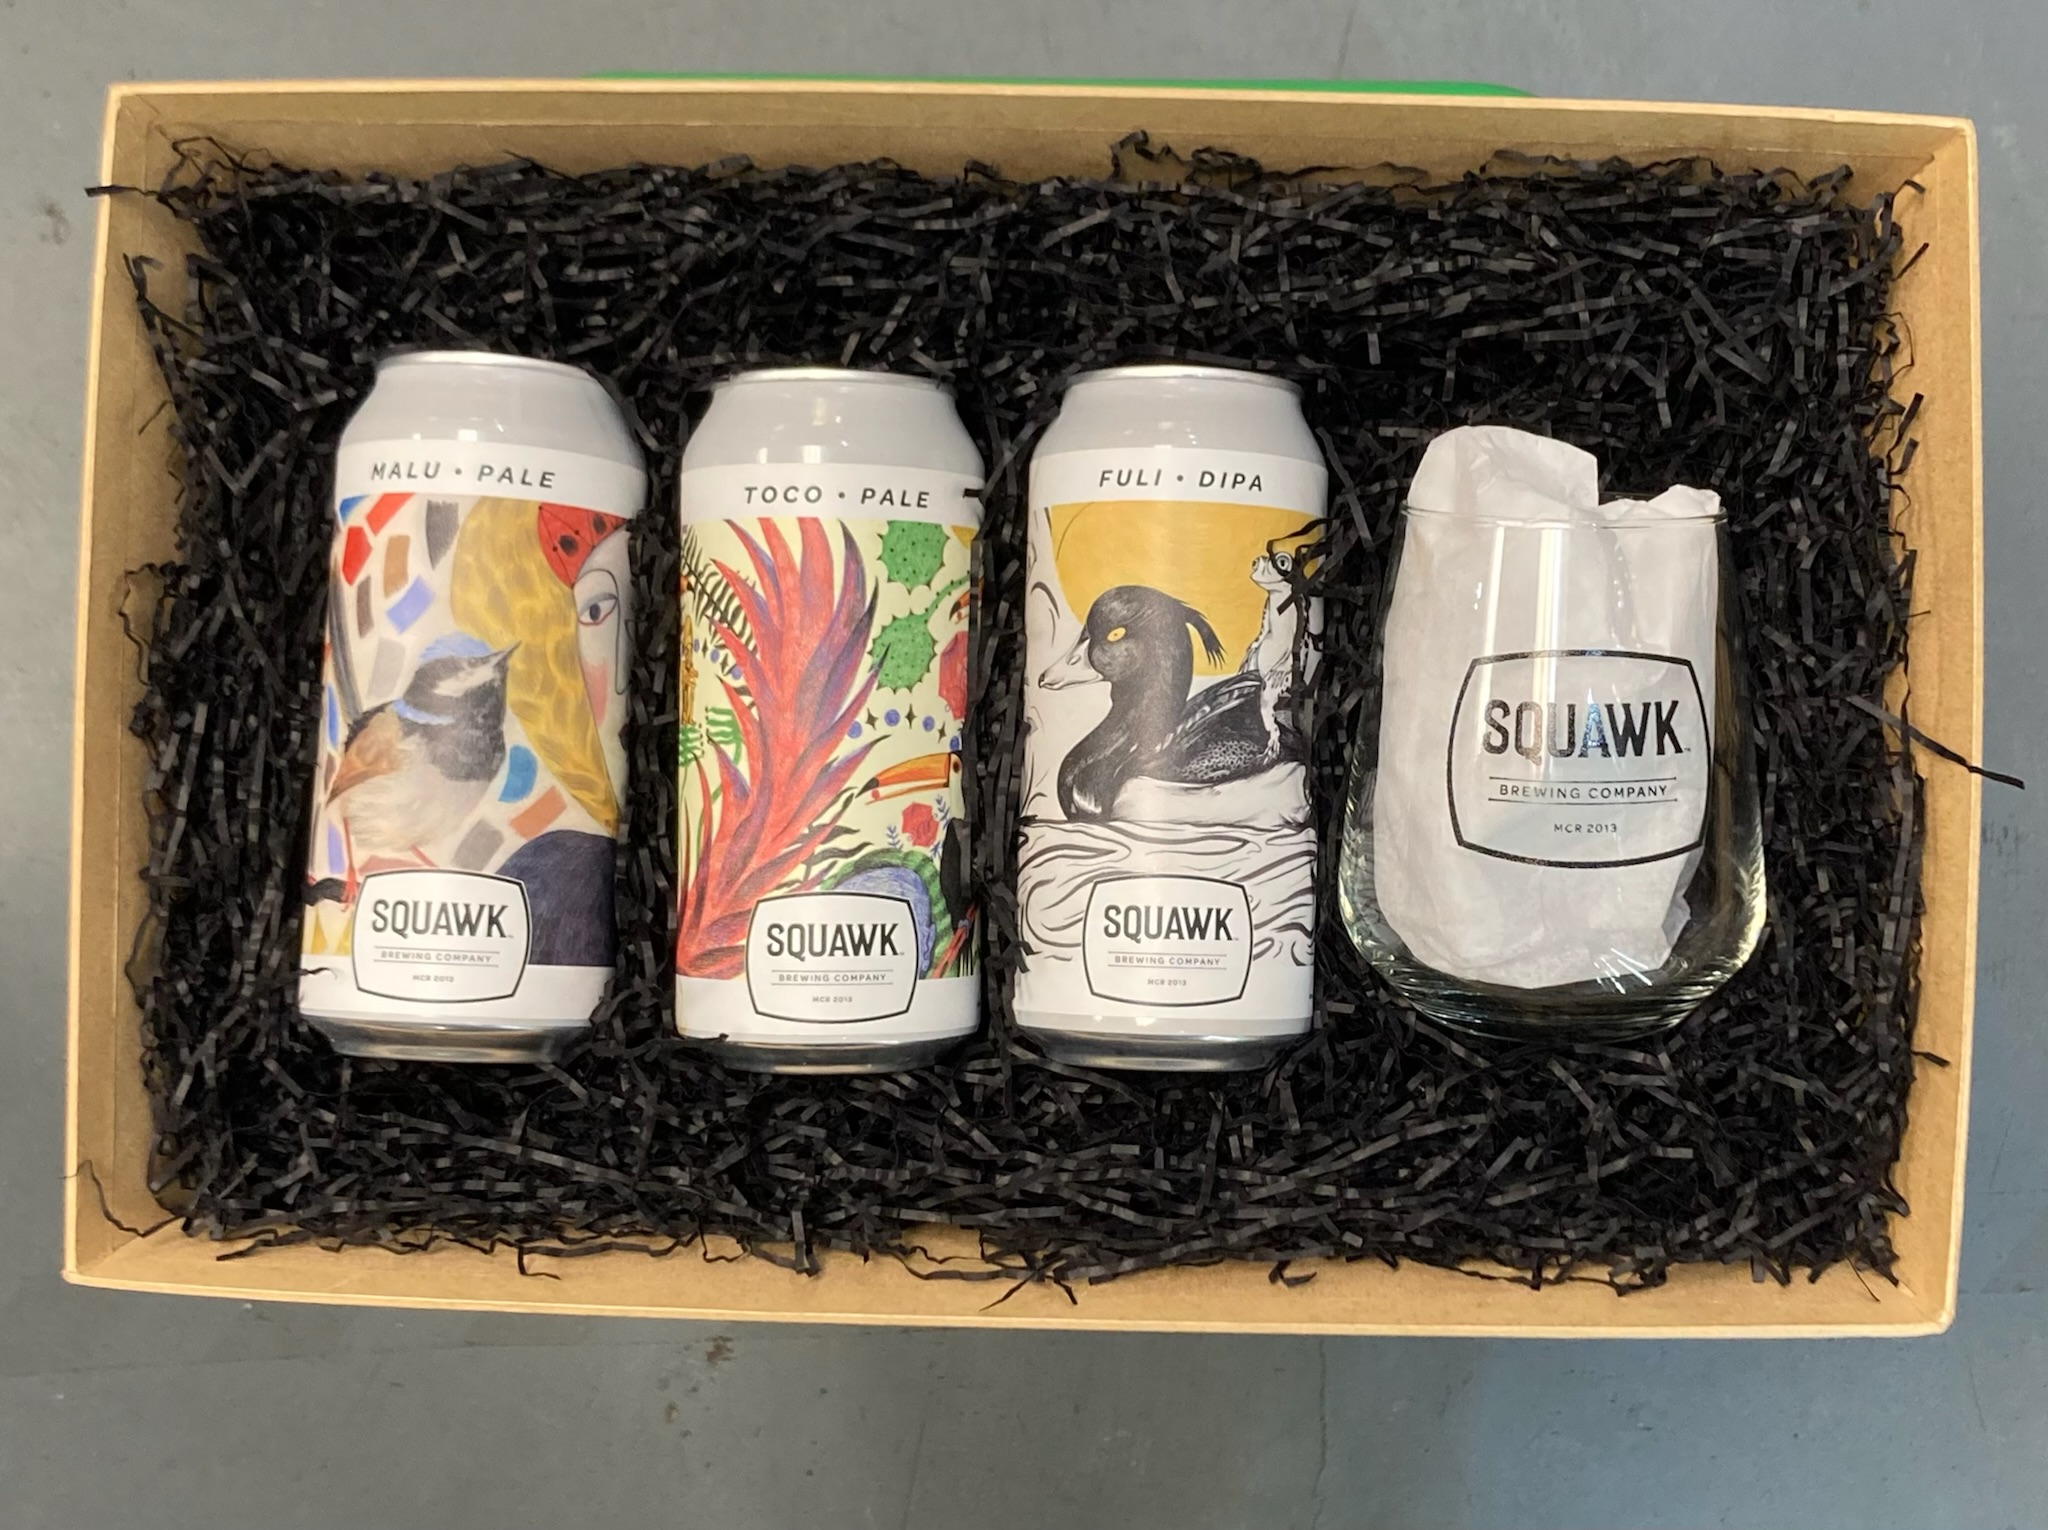 Squawk Brewery Hamper with Glass